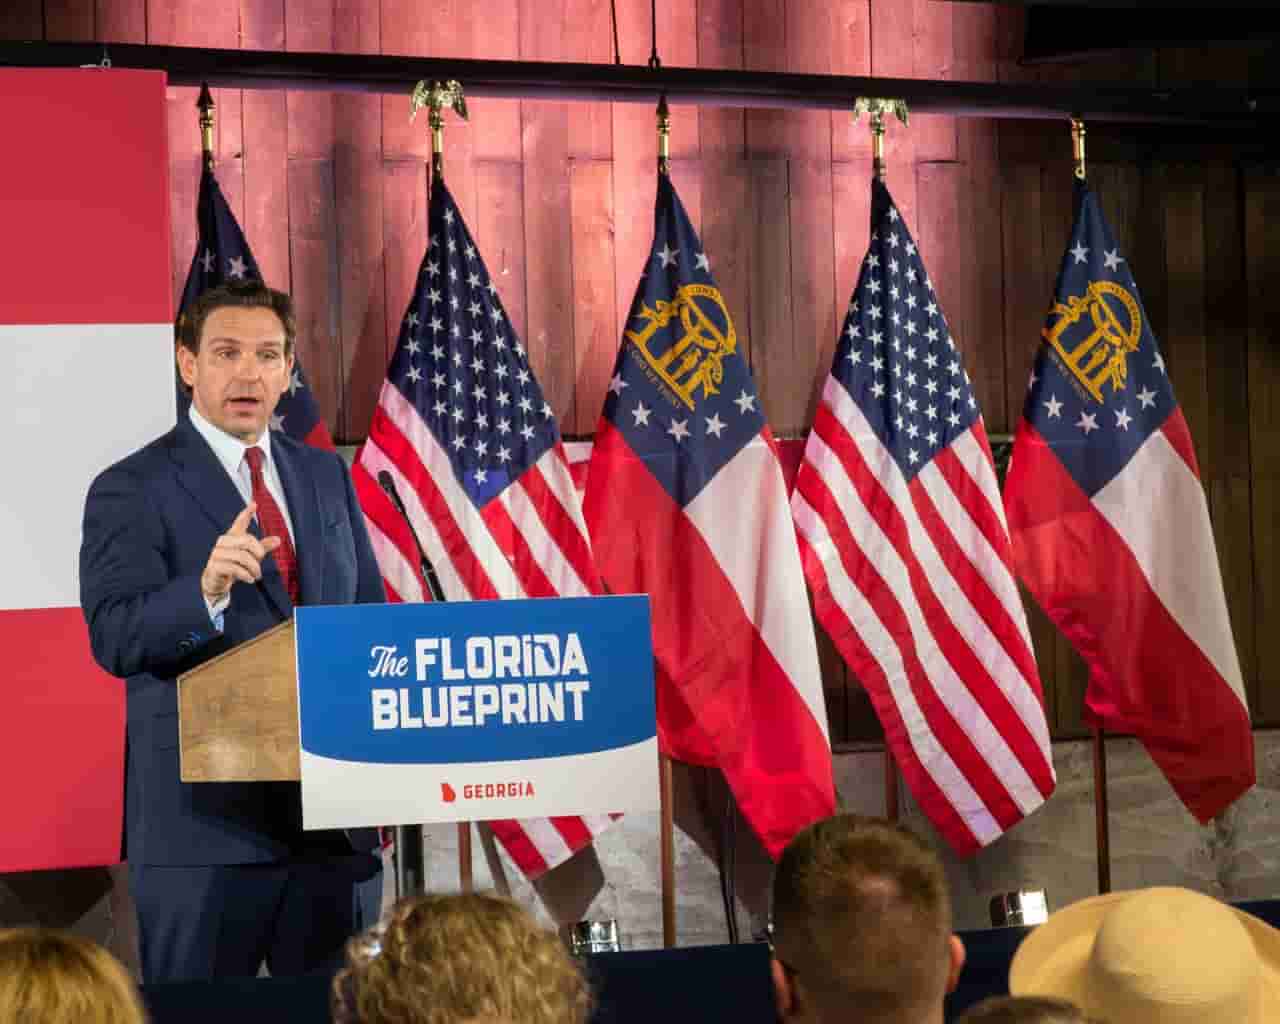 Ron DeSantis: Government wants to regulate Bitcoin ‘out of existence’